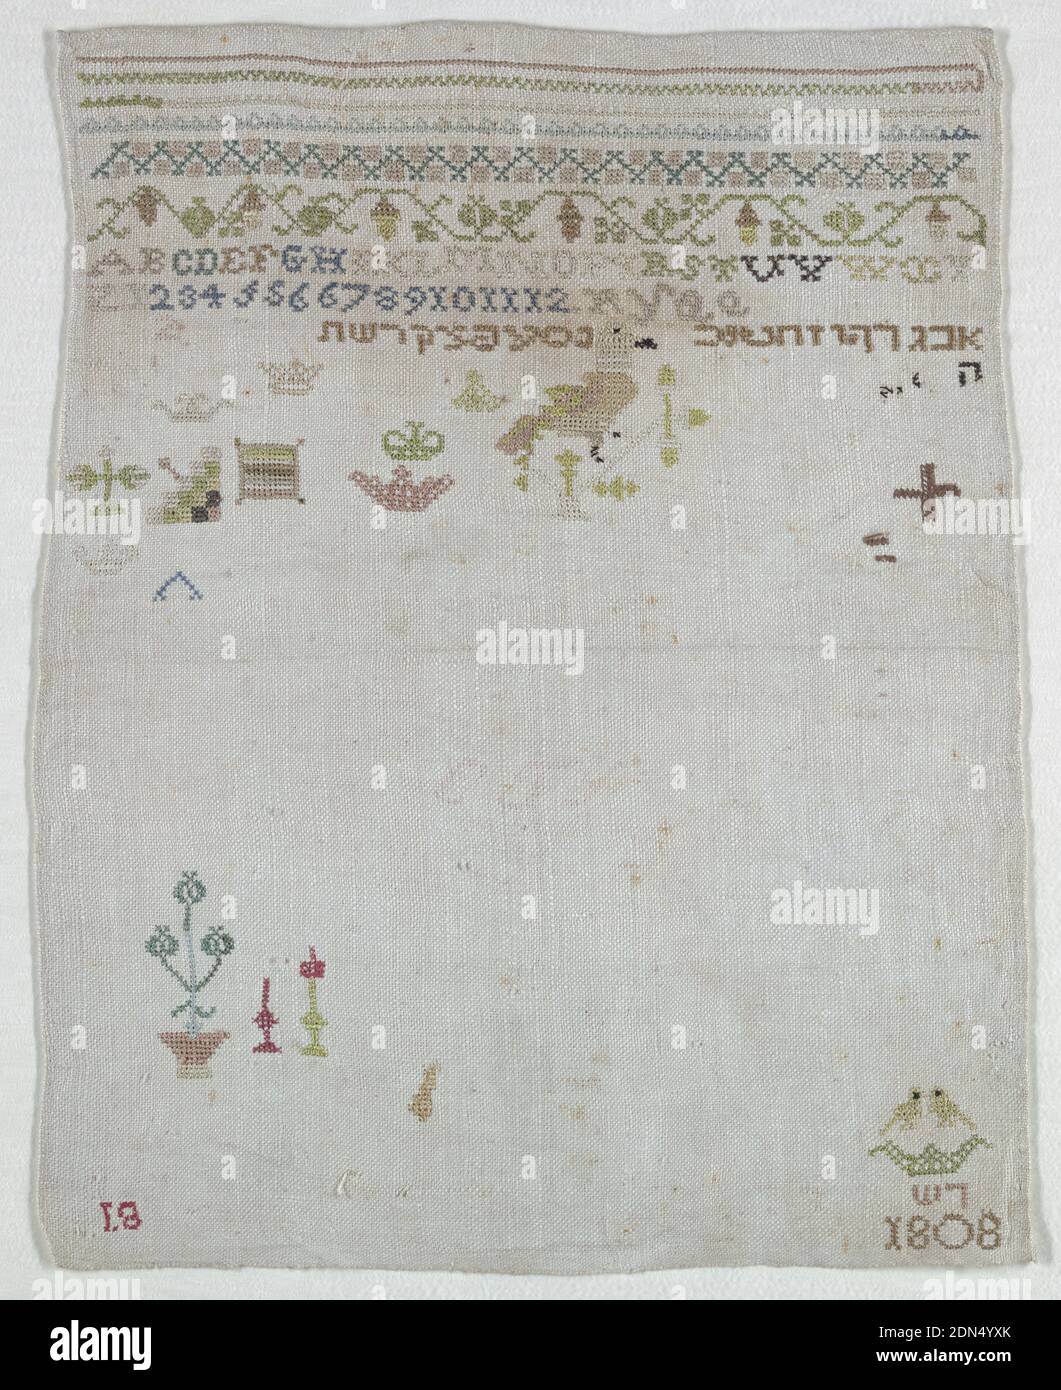 Sampler, Medium: silk embroidery on linen foundation Technique: embroidered in cross stitches on plain weave foundation, Bands of pattern, Arabic alphabet, and Hebrew letters., Germany, 1808, embroidery & stitching, Sampler Stock Photo